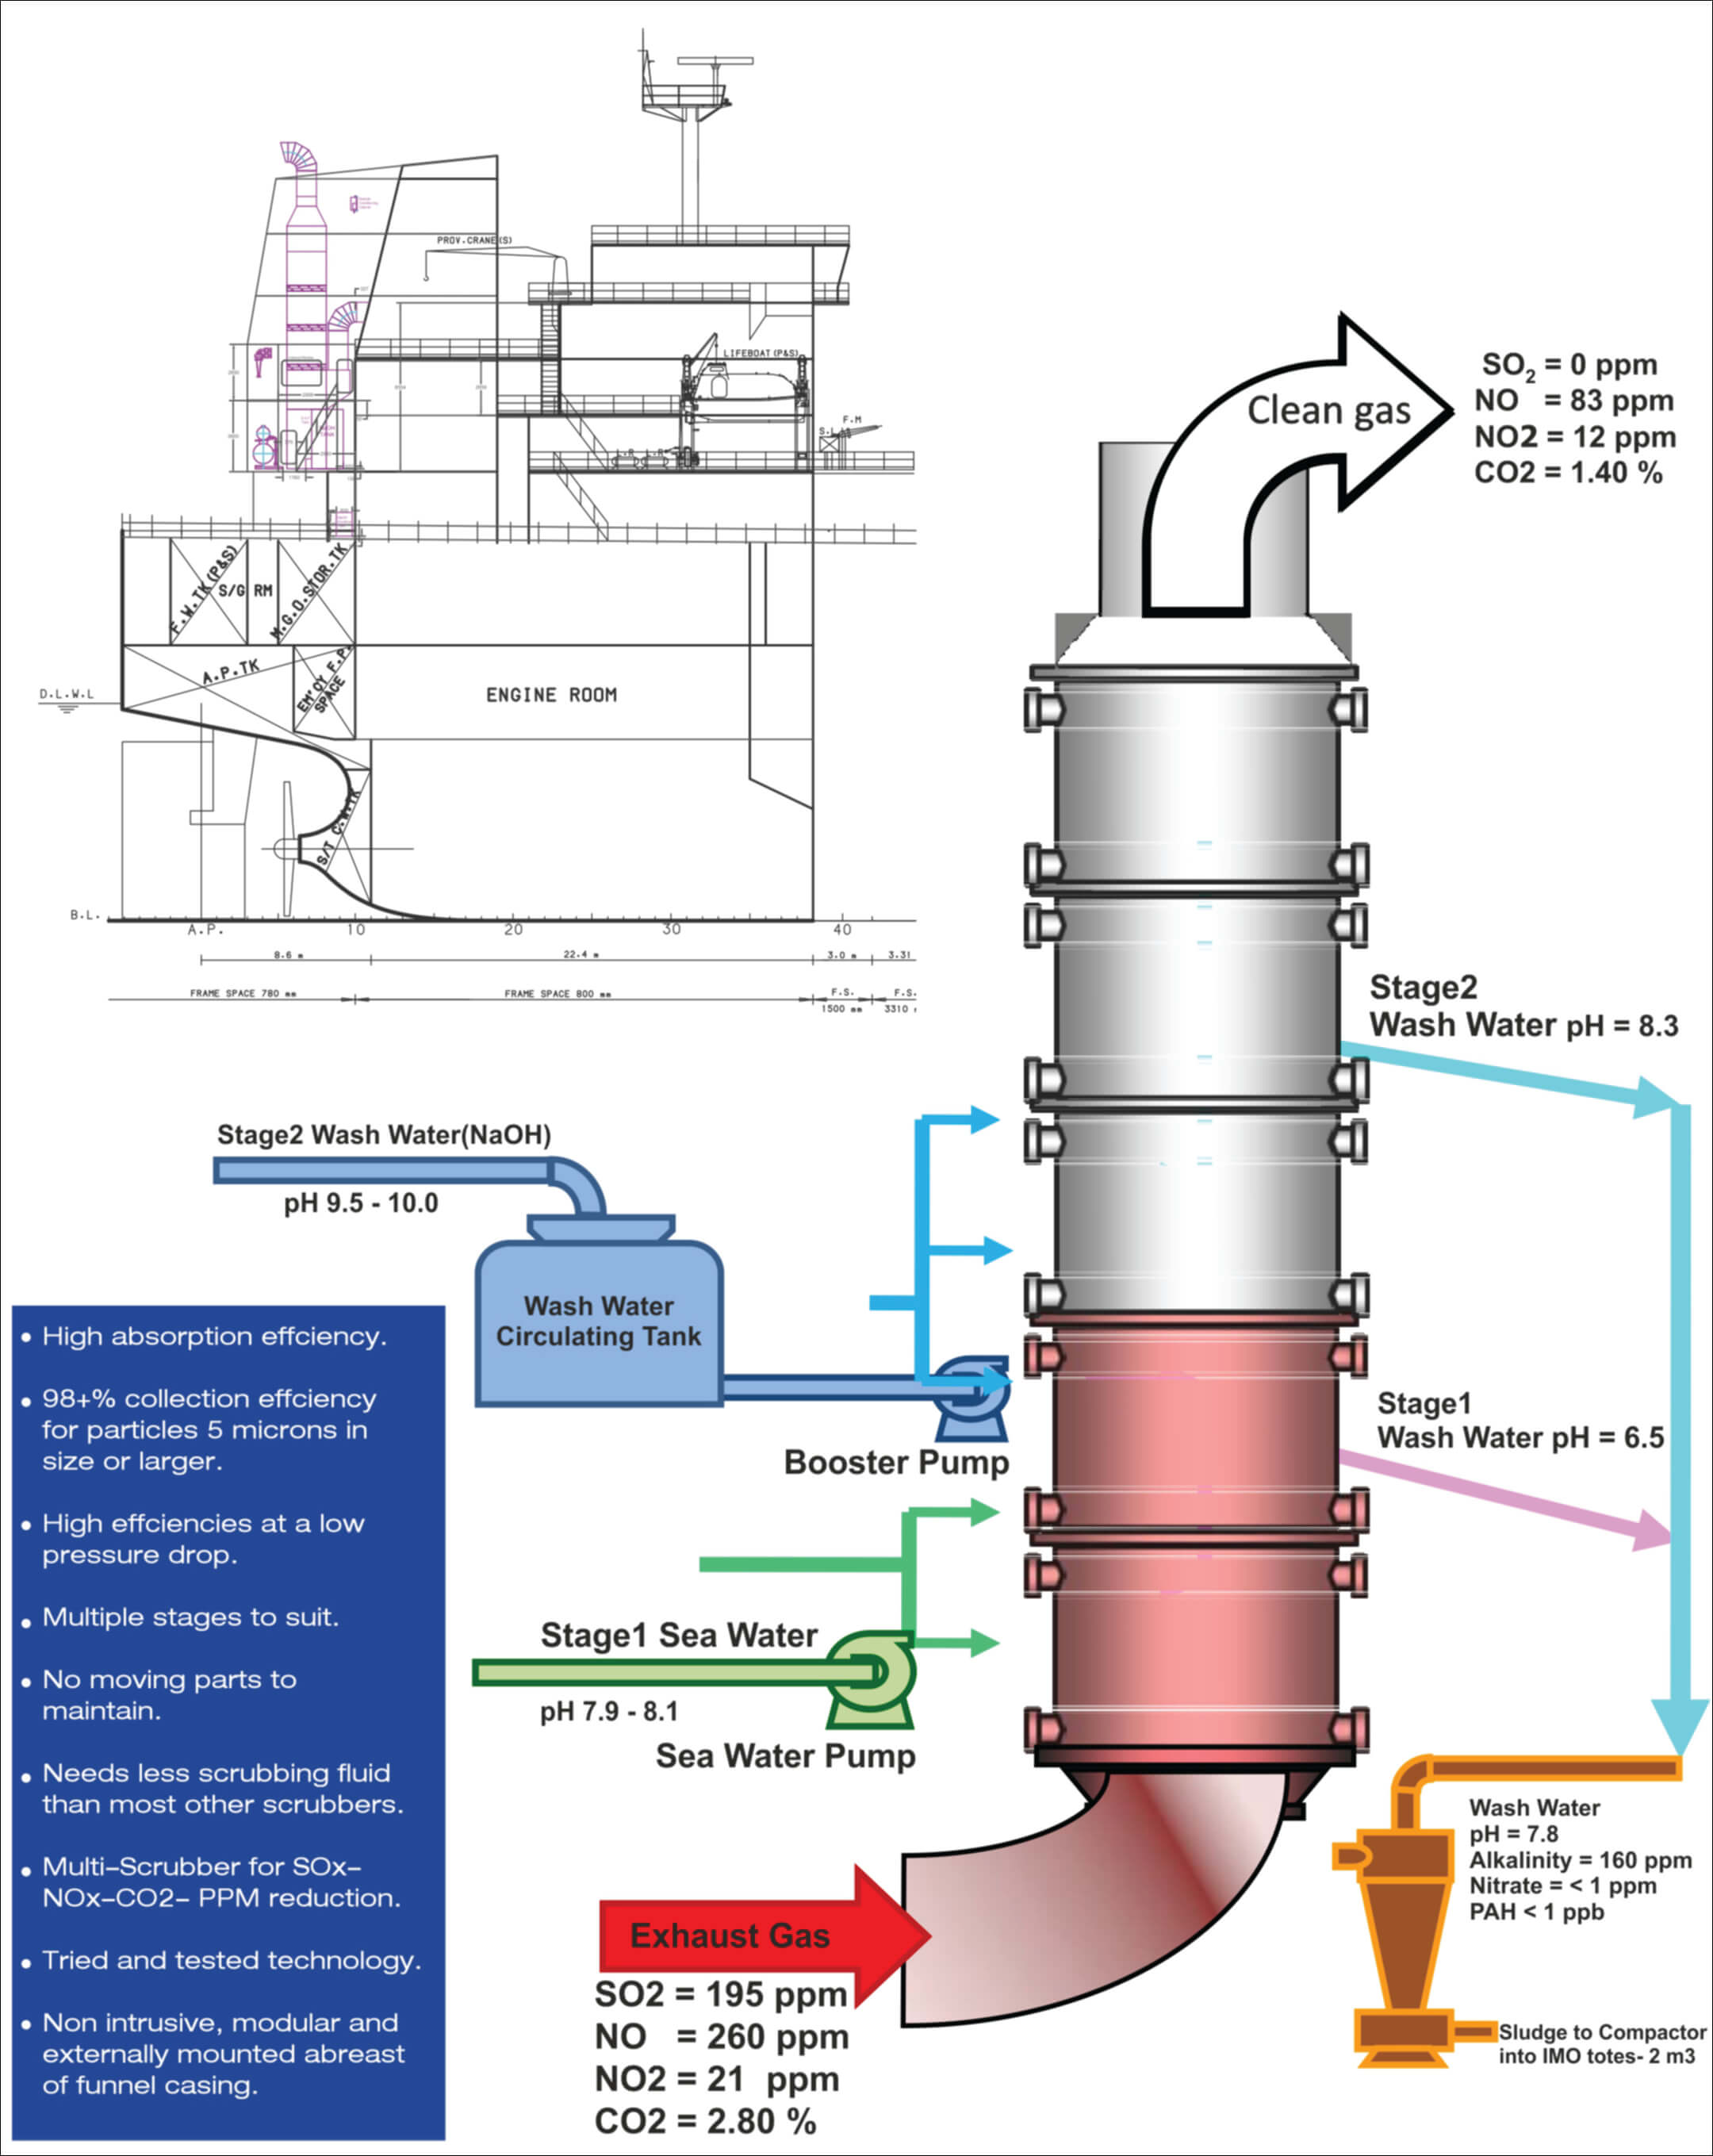 Diagram showing an open-loop Marine Exhaust Gas Cleaning System that removes sulfur and nitrogen compounds from a ship’s engine exhaust and dumps them into the surrounding water. Graphic: Tritech Engineers